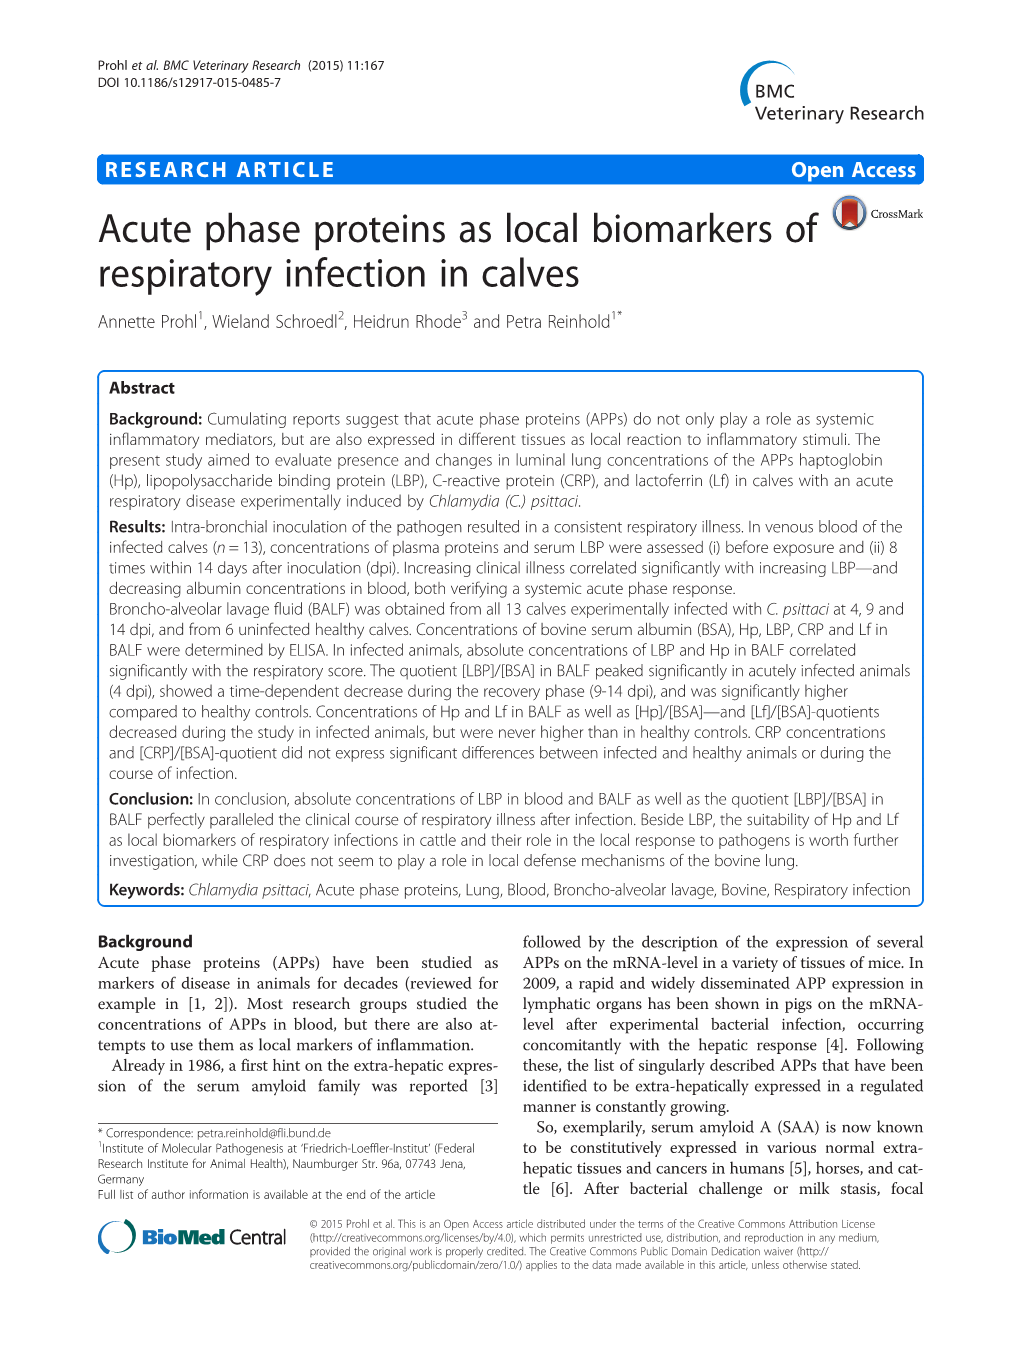 Acute Phase Proteins As Local Biomarkers of Respiratory Infection in Calves Annette Prohl1, Wieland Schroedl2, Heidrun Rhode3 and Petra Reinhold1*